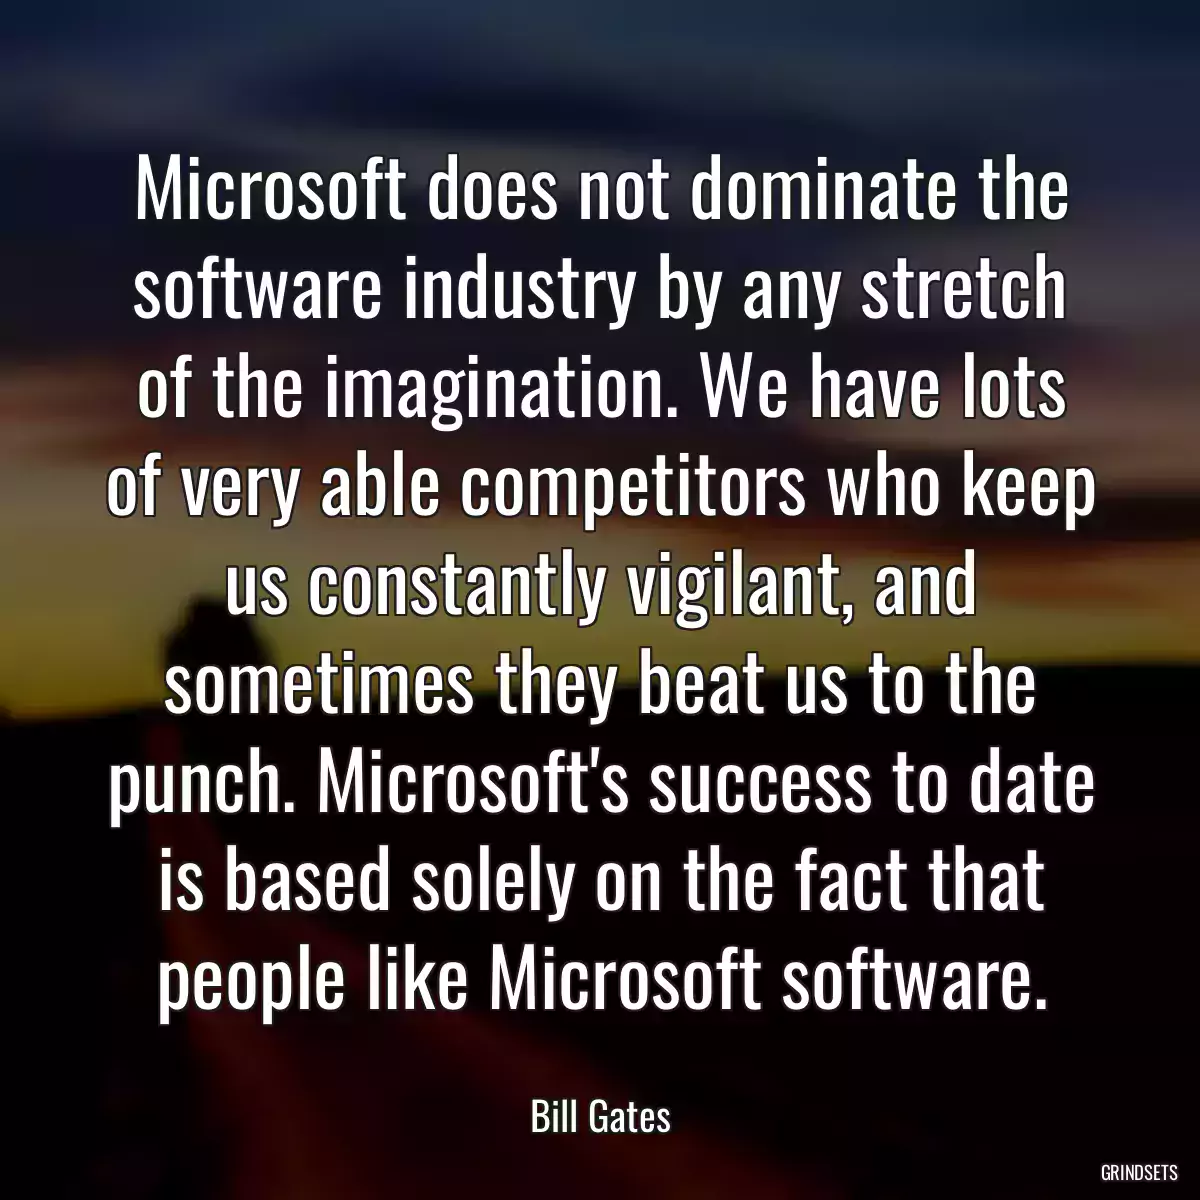 Microsoft does not dominate the software industry by any stretch of the imagination. We have lots of very able competitors who keep us constantly vigilant, and sometimes they beat us to the punch. Microsoft\'s success to date is based solely on the fact that people like Microsoft software.